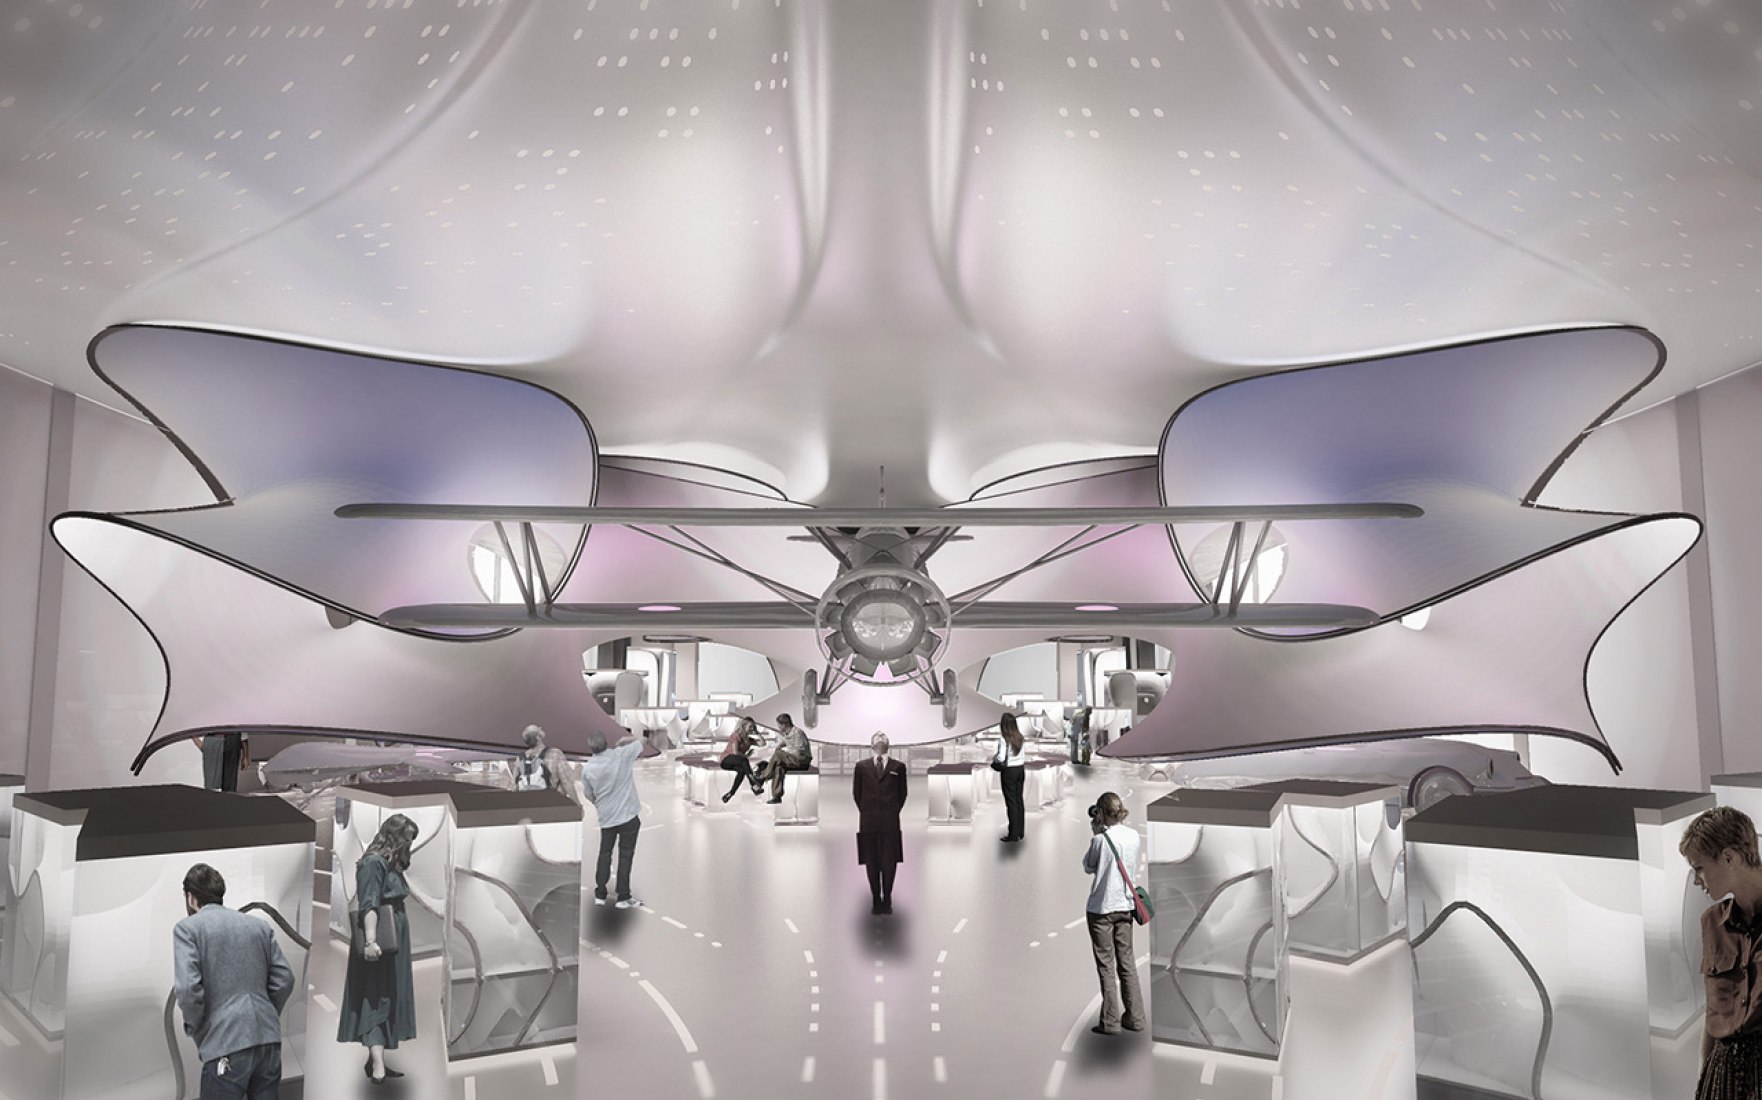 A view of the new Science Museum Mathematics Gallery featuring the Handley Page aircraft. Credit: Zaha Hadid Architects. Image courtesy of Science Museum.